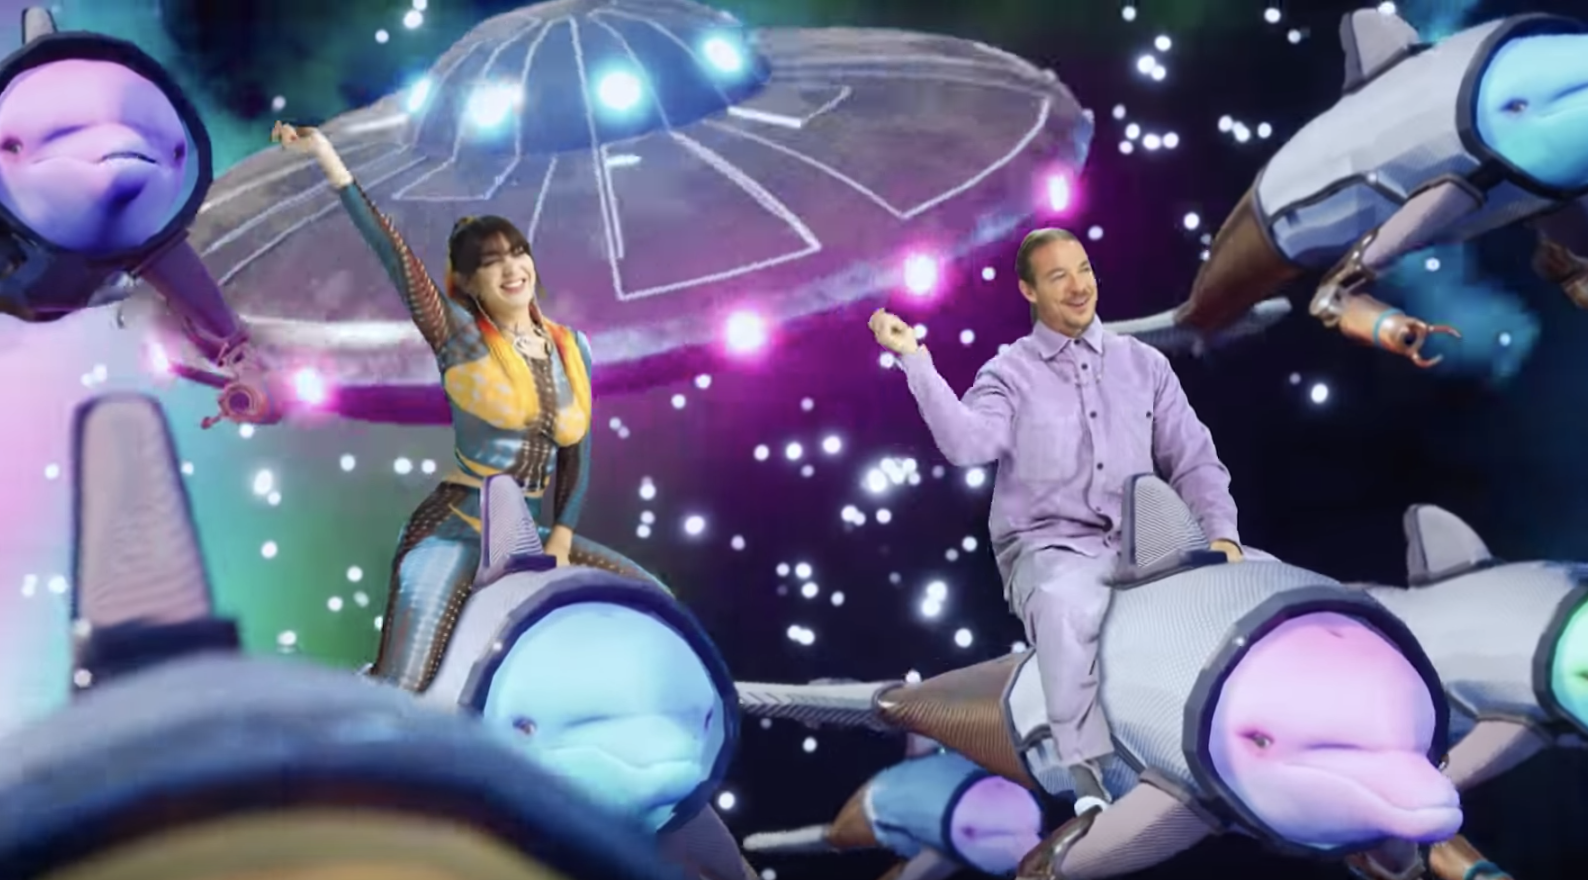 Charli XCX & Diplo's Spice Girls Remix Is Here... In A Dolphin Wonderland